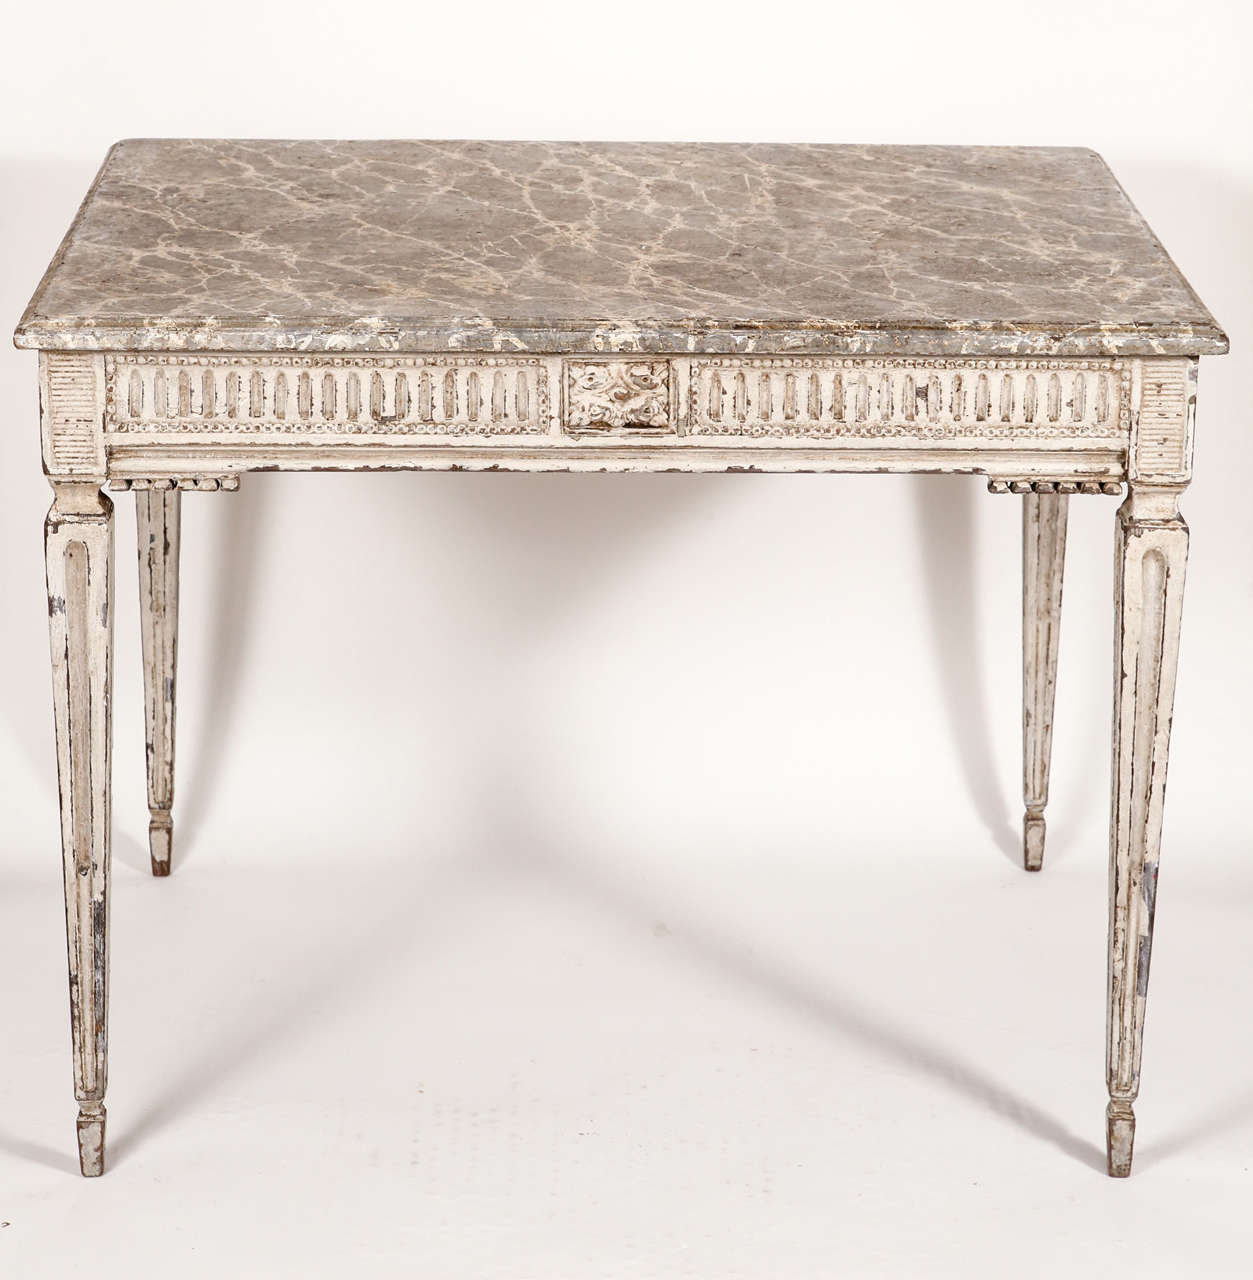 Beautifully painted table with faux marbled top.  Fluted leg and apron detail.  Single drawer with original hardware.  Naturally distressed finish.  Thought to be early 19th century.  Dimensions: 29 1/2